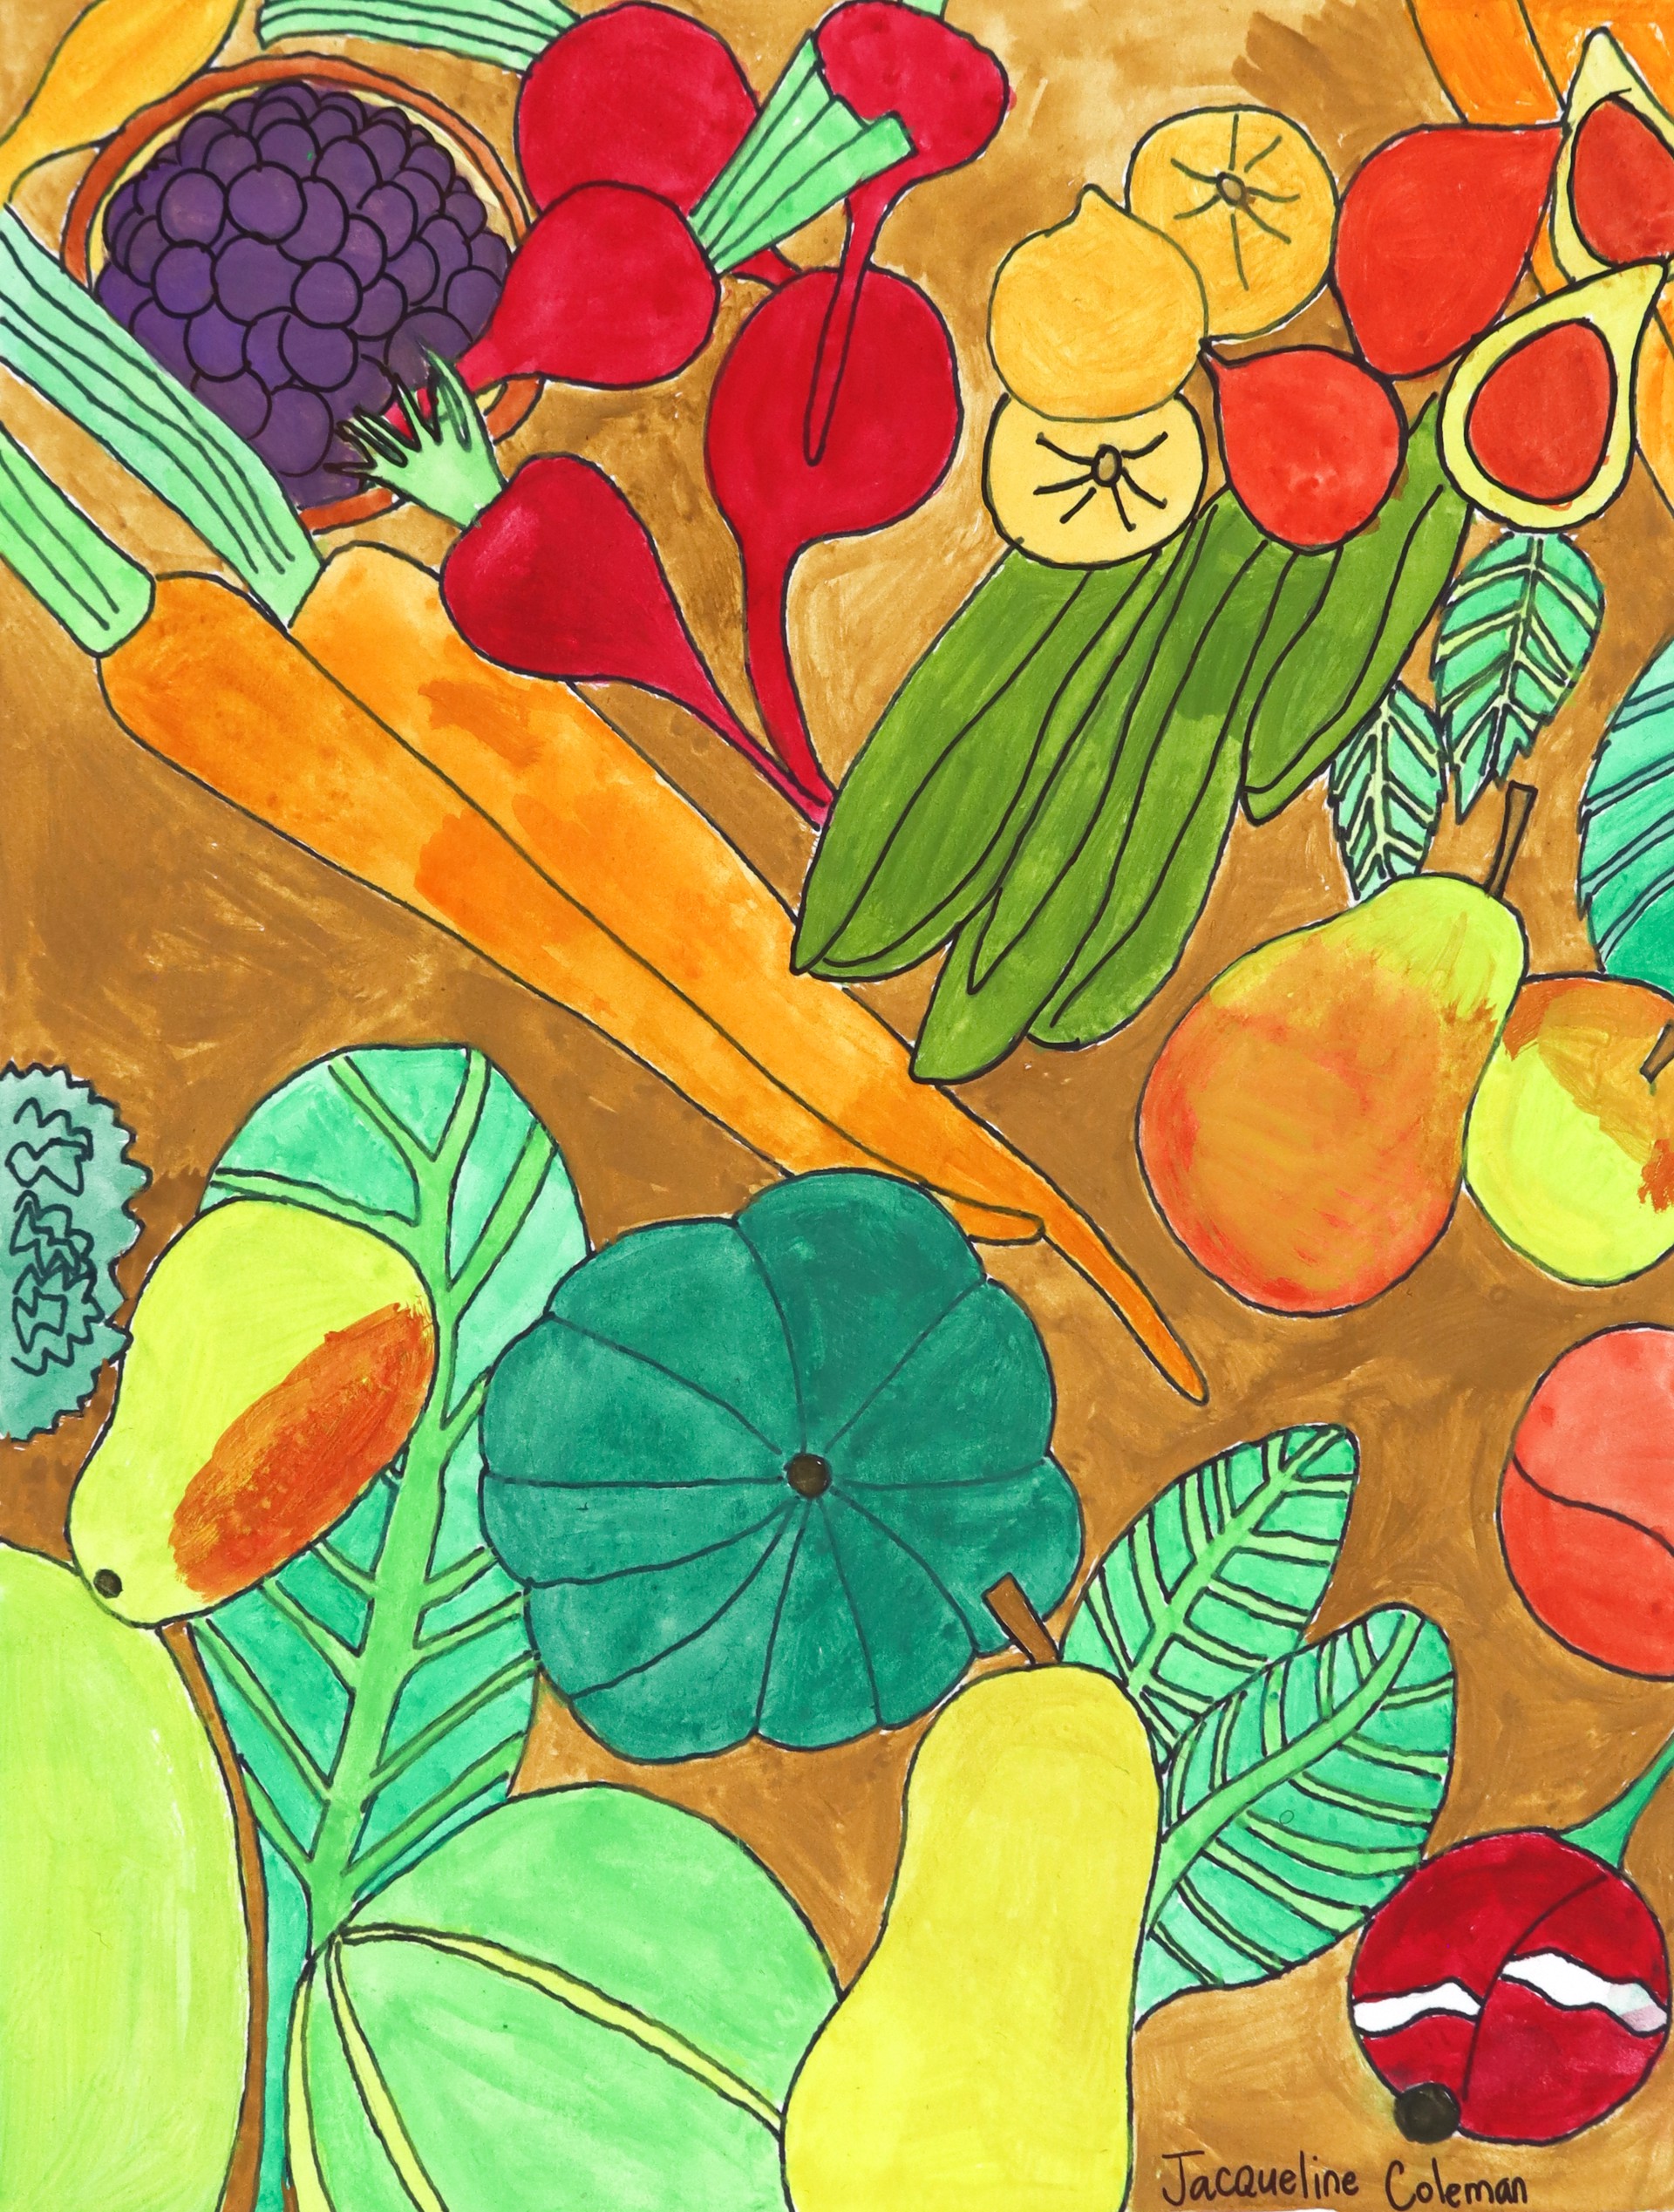 Fruit and Veggies by Jacqueline Coleman